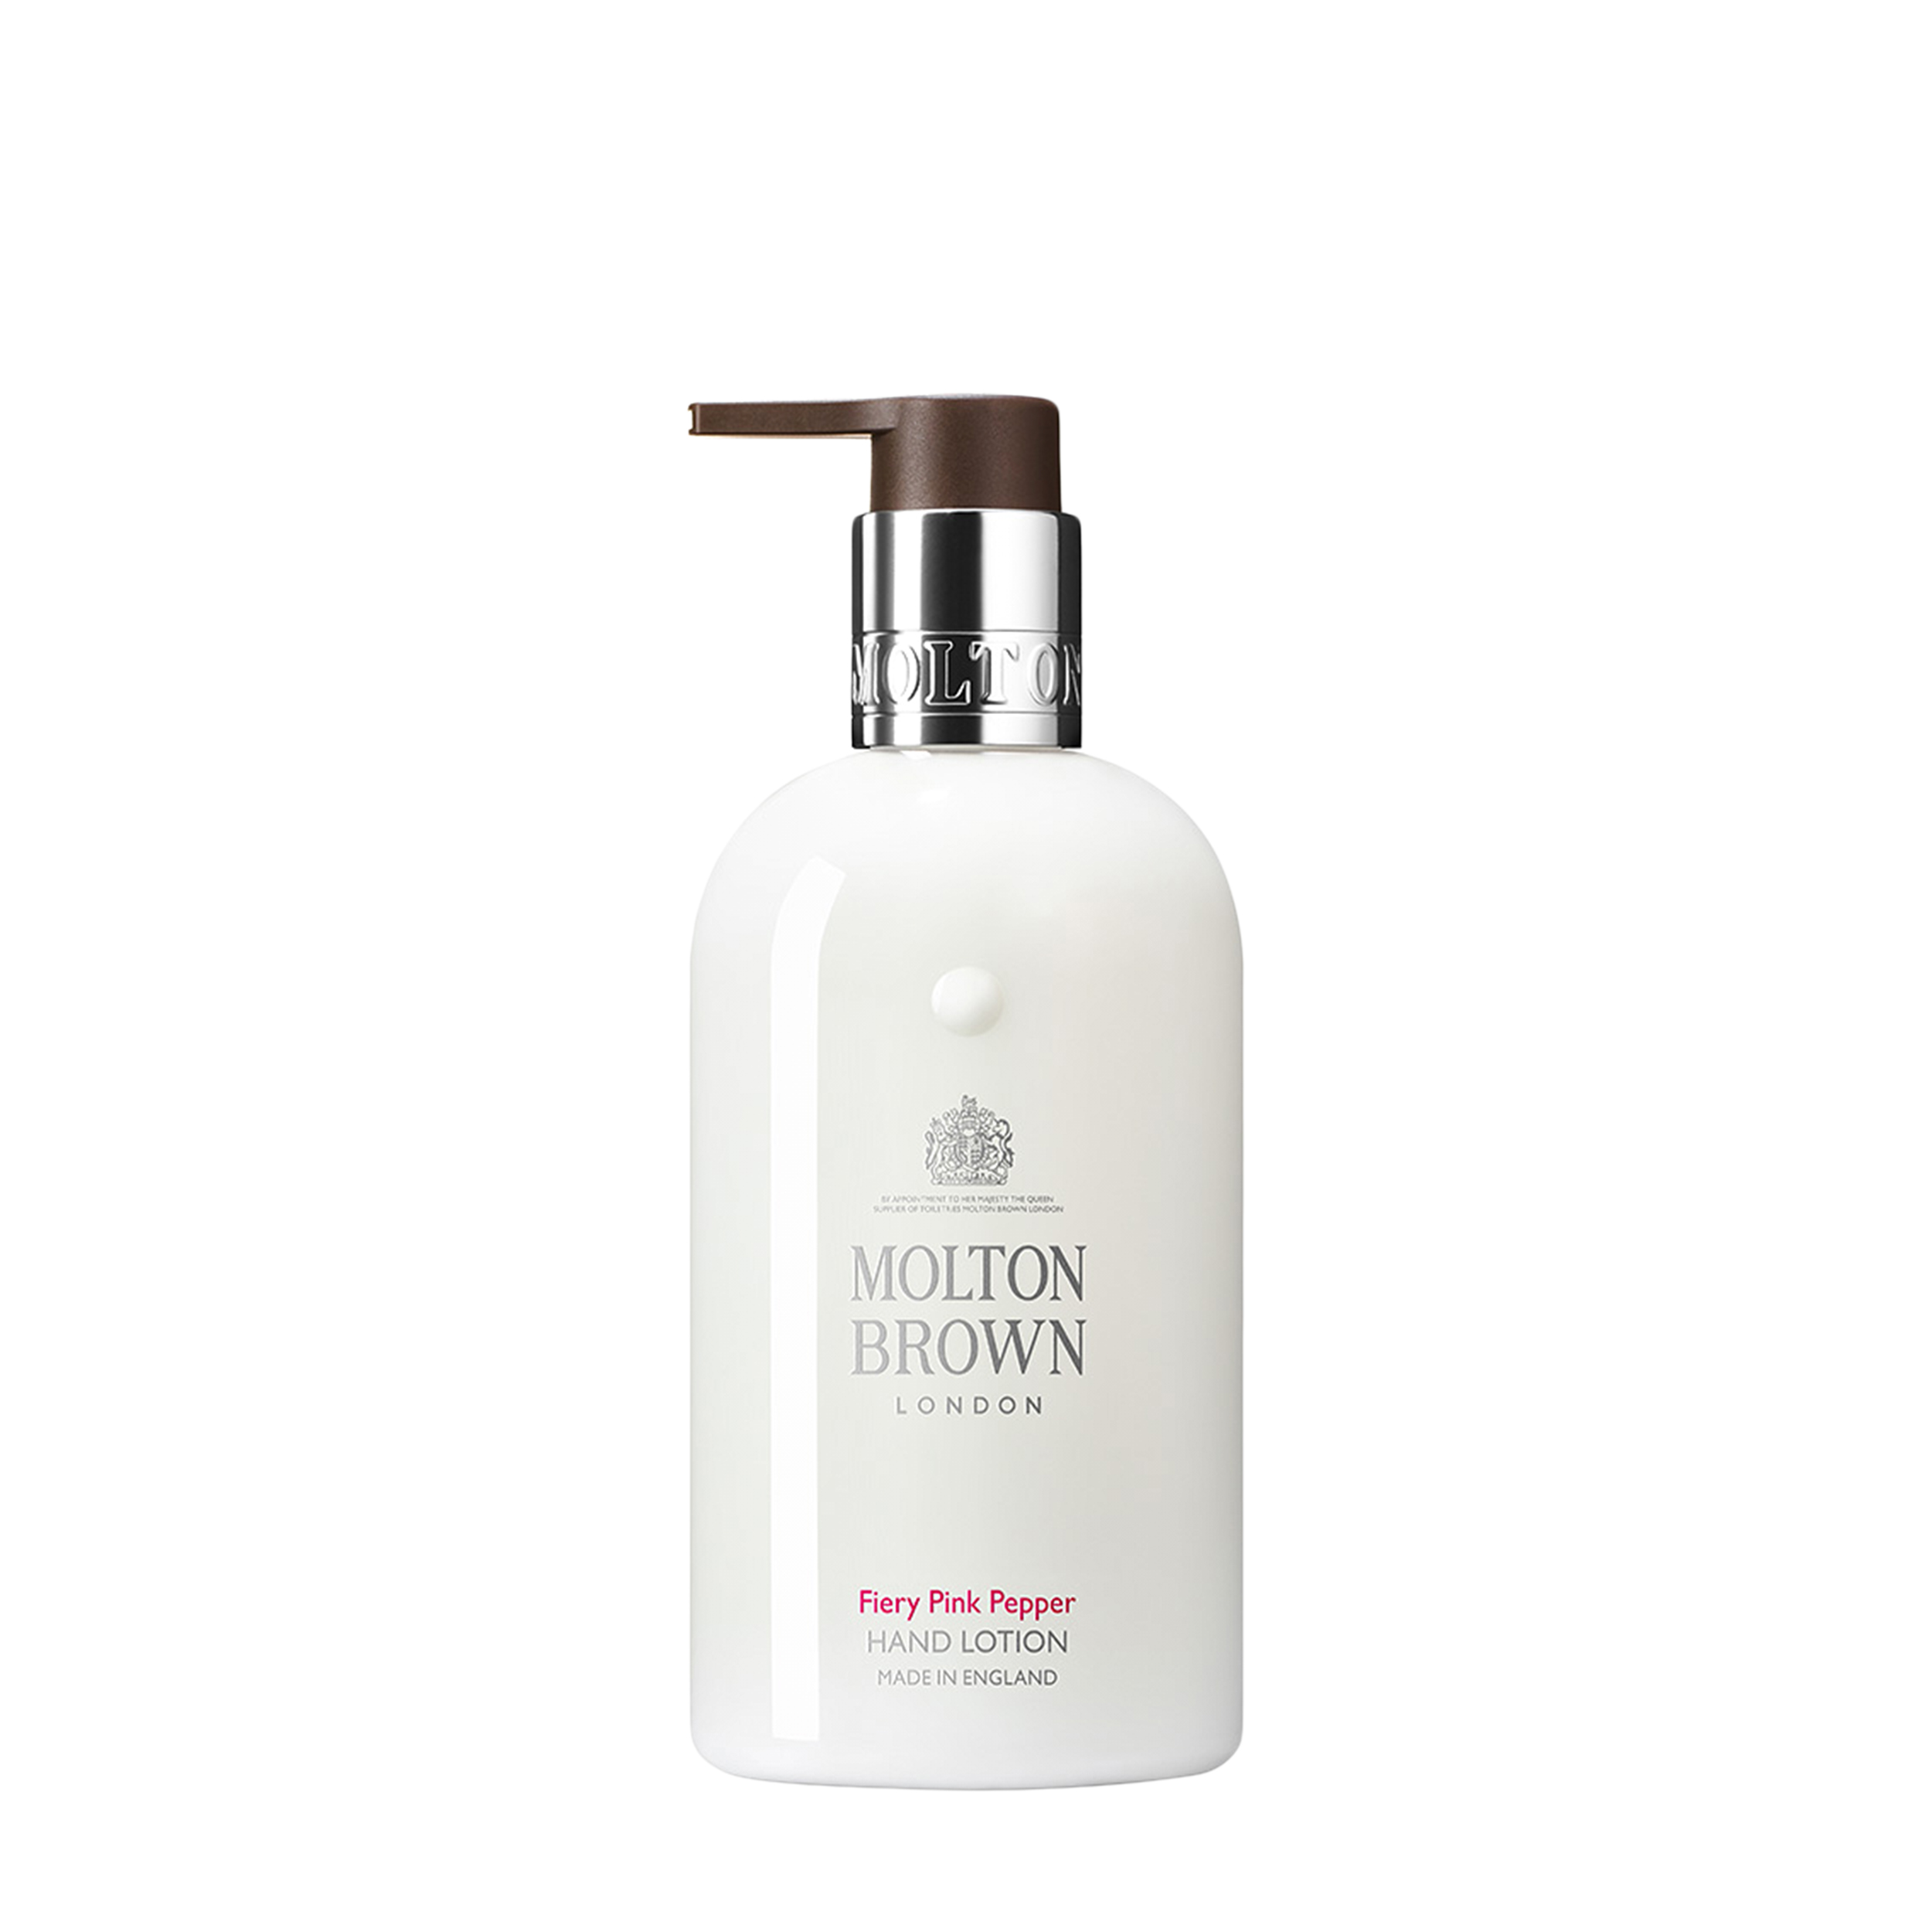 Molton Brown Molton Brown Лосьон для рук Fiery Pink Pepper Hand Lotion 300 мл от Foambox